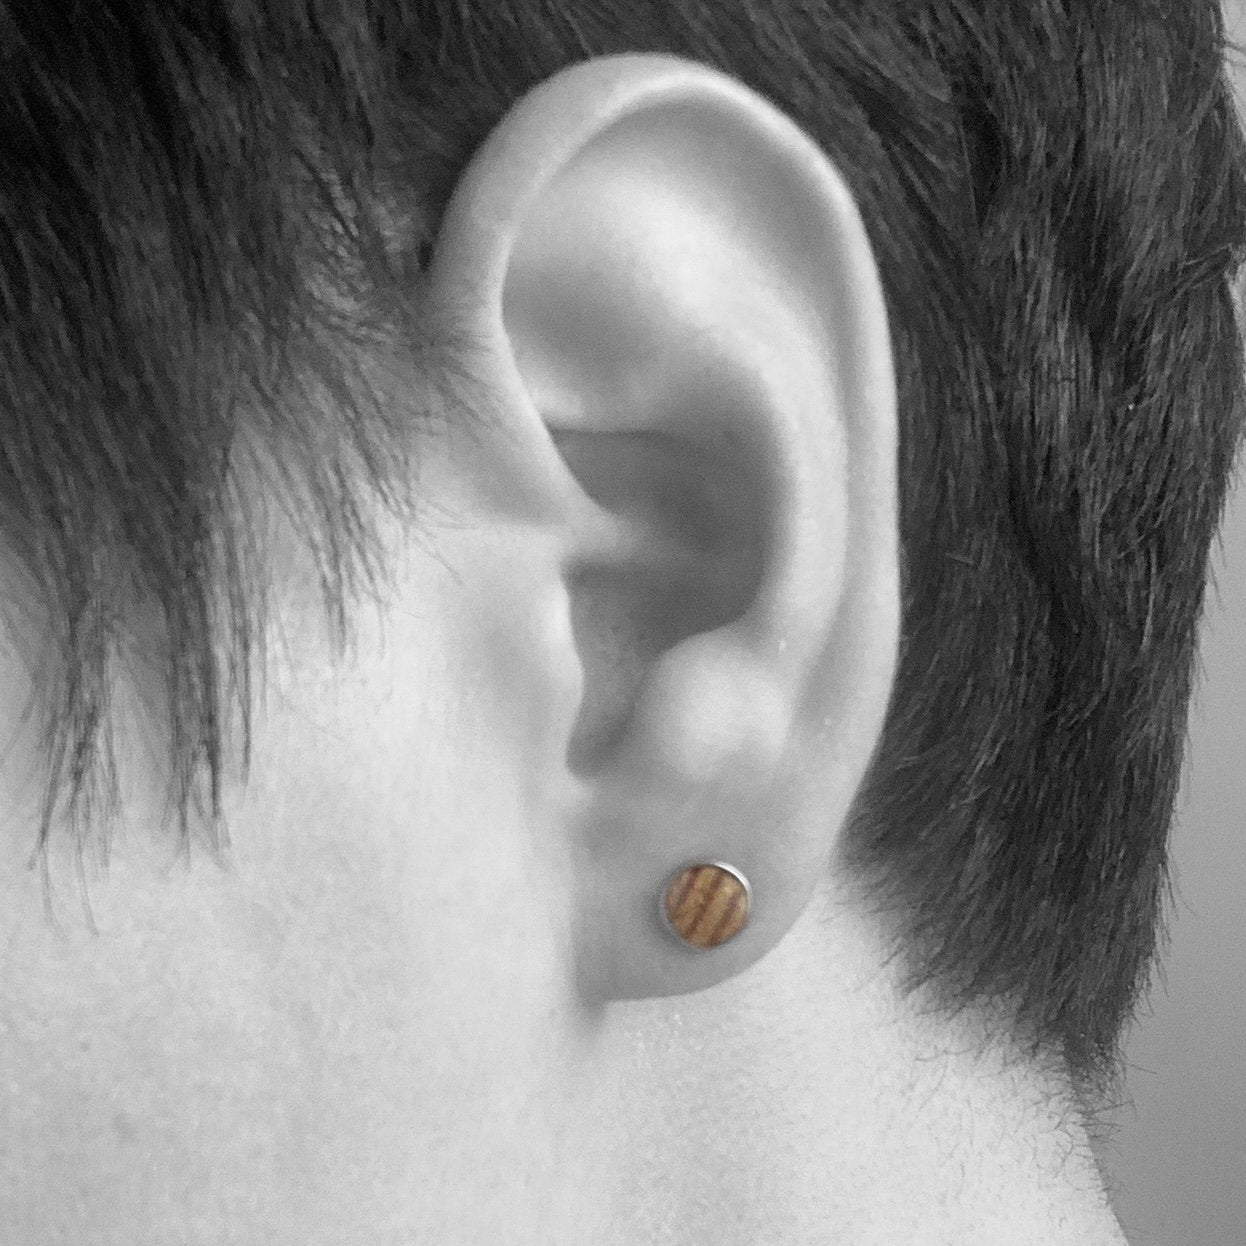 6mm Round Studs made from Painted Wine Cork Recycled materials jewellery earrings studs handmade in London by Jagoda Jay Sudak Keshani eco gift for her him